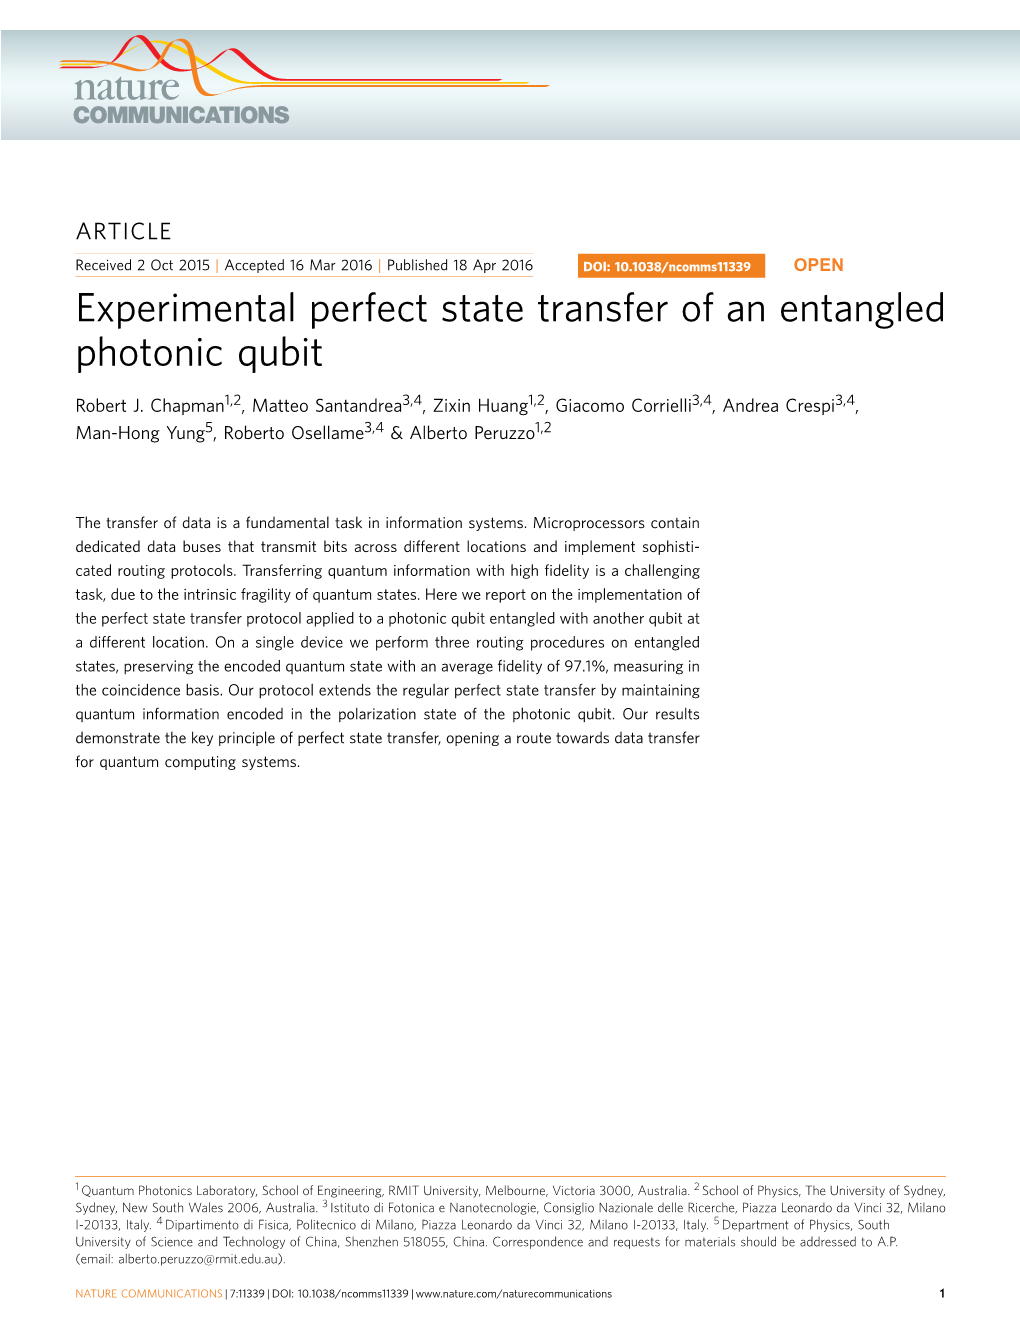 Experimental Perfect State Transfer of an Entangled Photonic Qubit